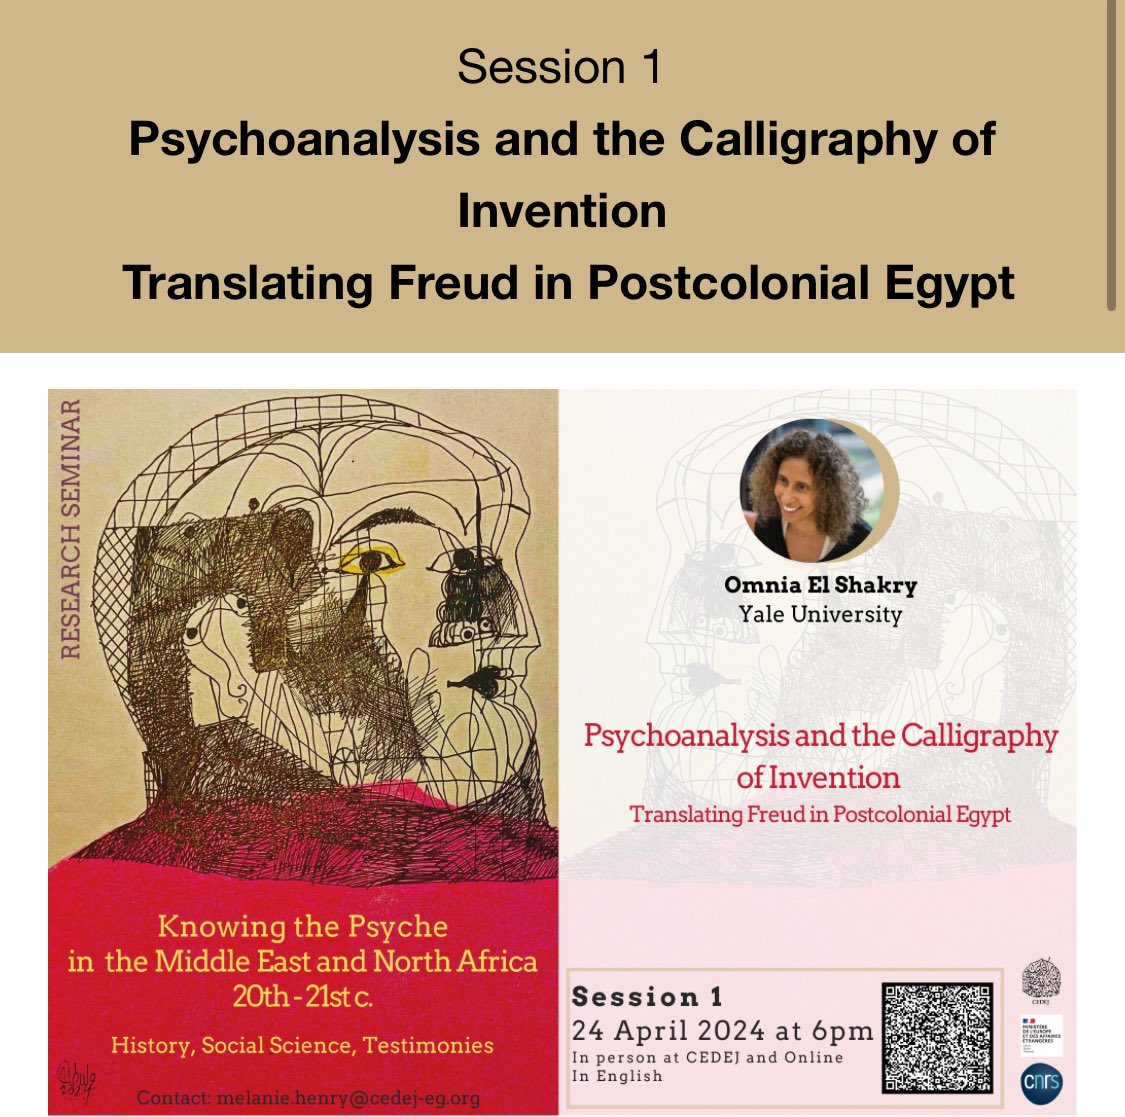 A talk taking place @CEDEJ_Egypte next week with Omnia El Shakry. To attend on Zoom, register here: cnrs.zoom.us/meeting/regist…